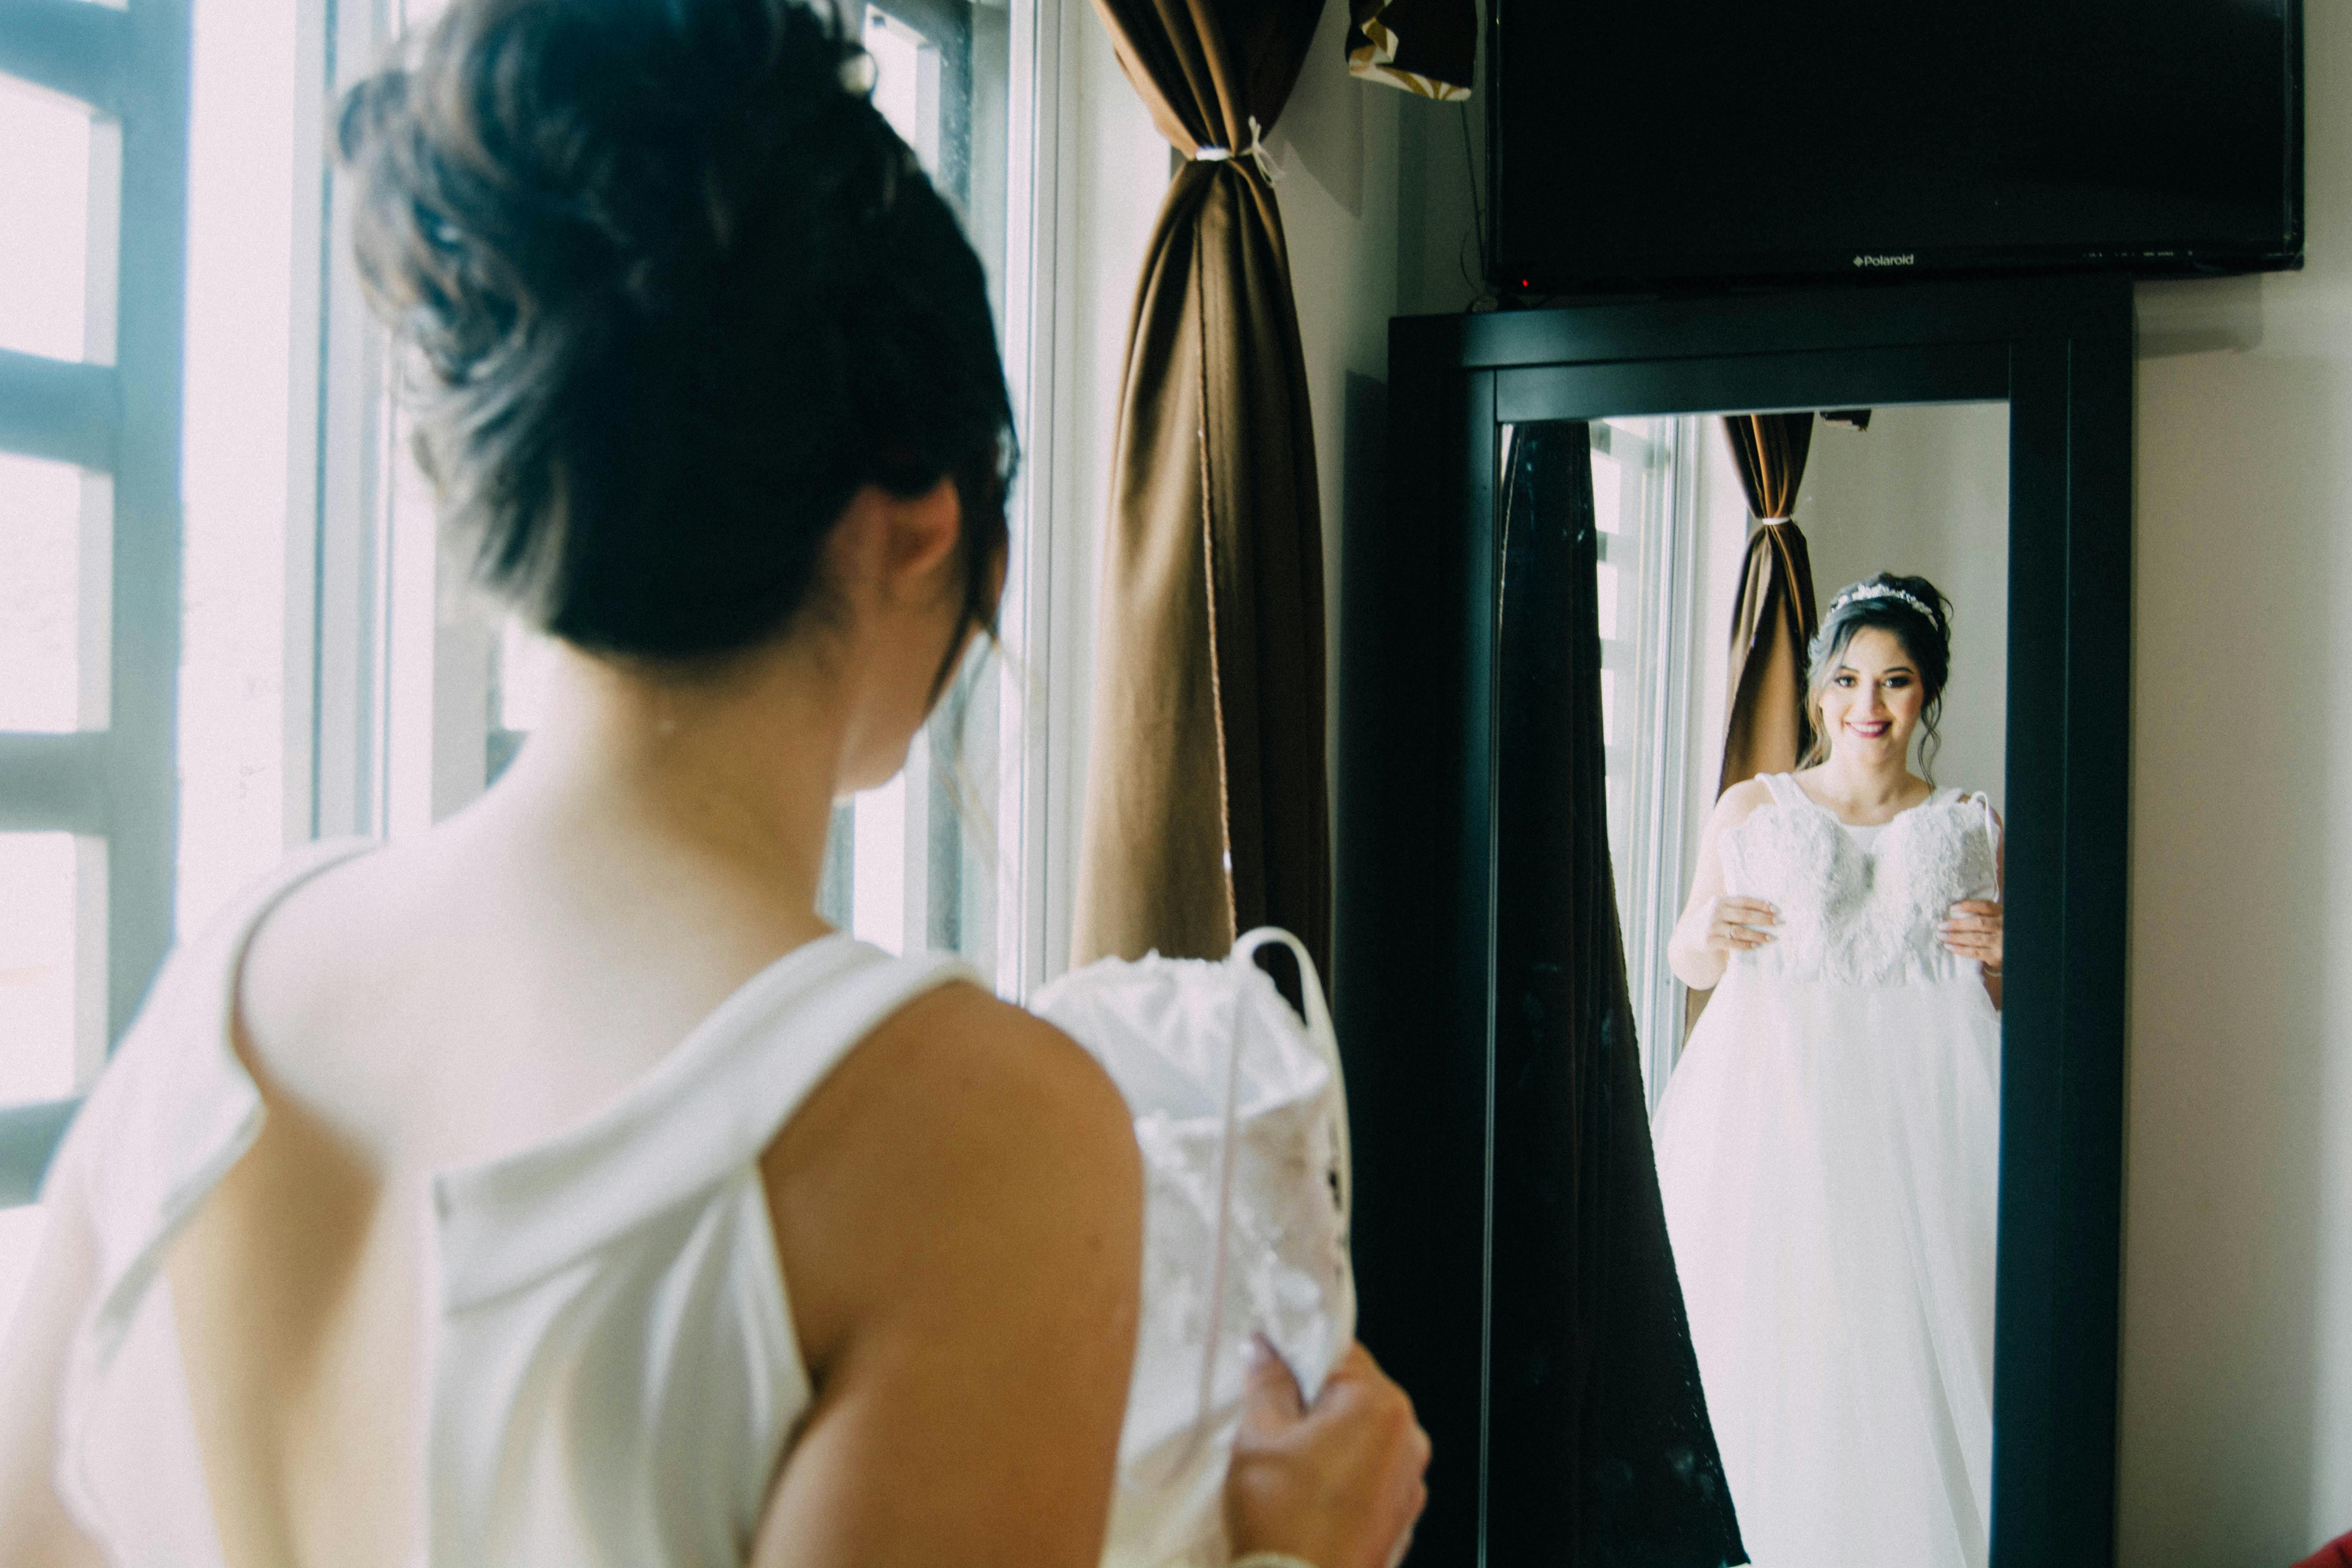 A happy bride holding her wedding dress while looking in a mirror | Source: Pexels